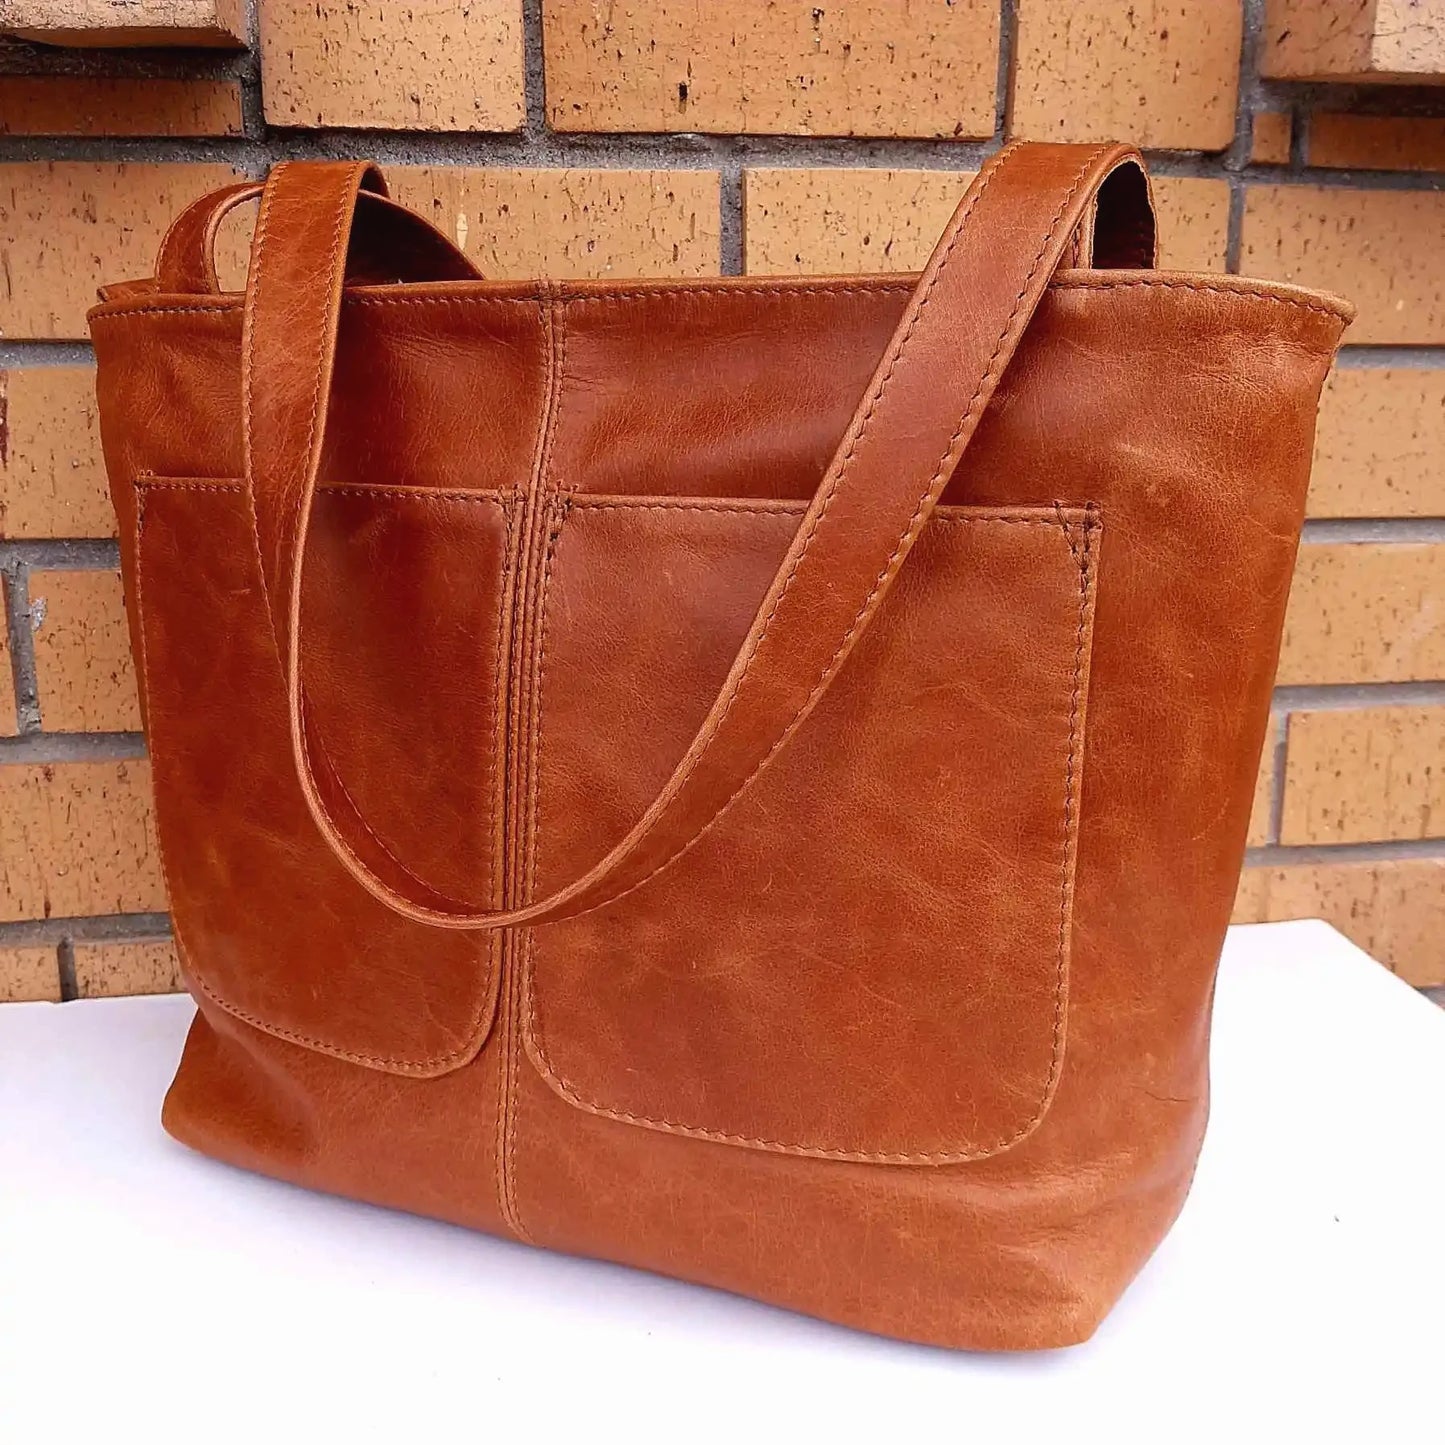 Botha tote designer bags in light tan made by cape Masai leather 